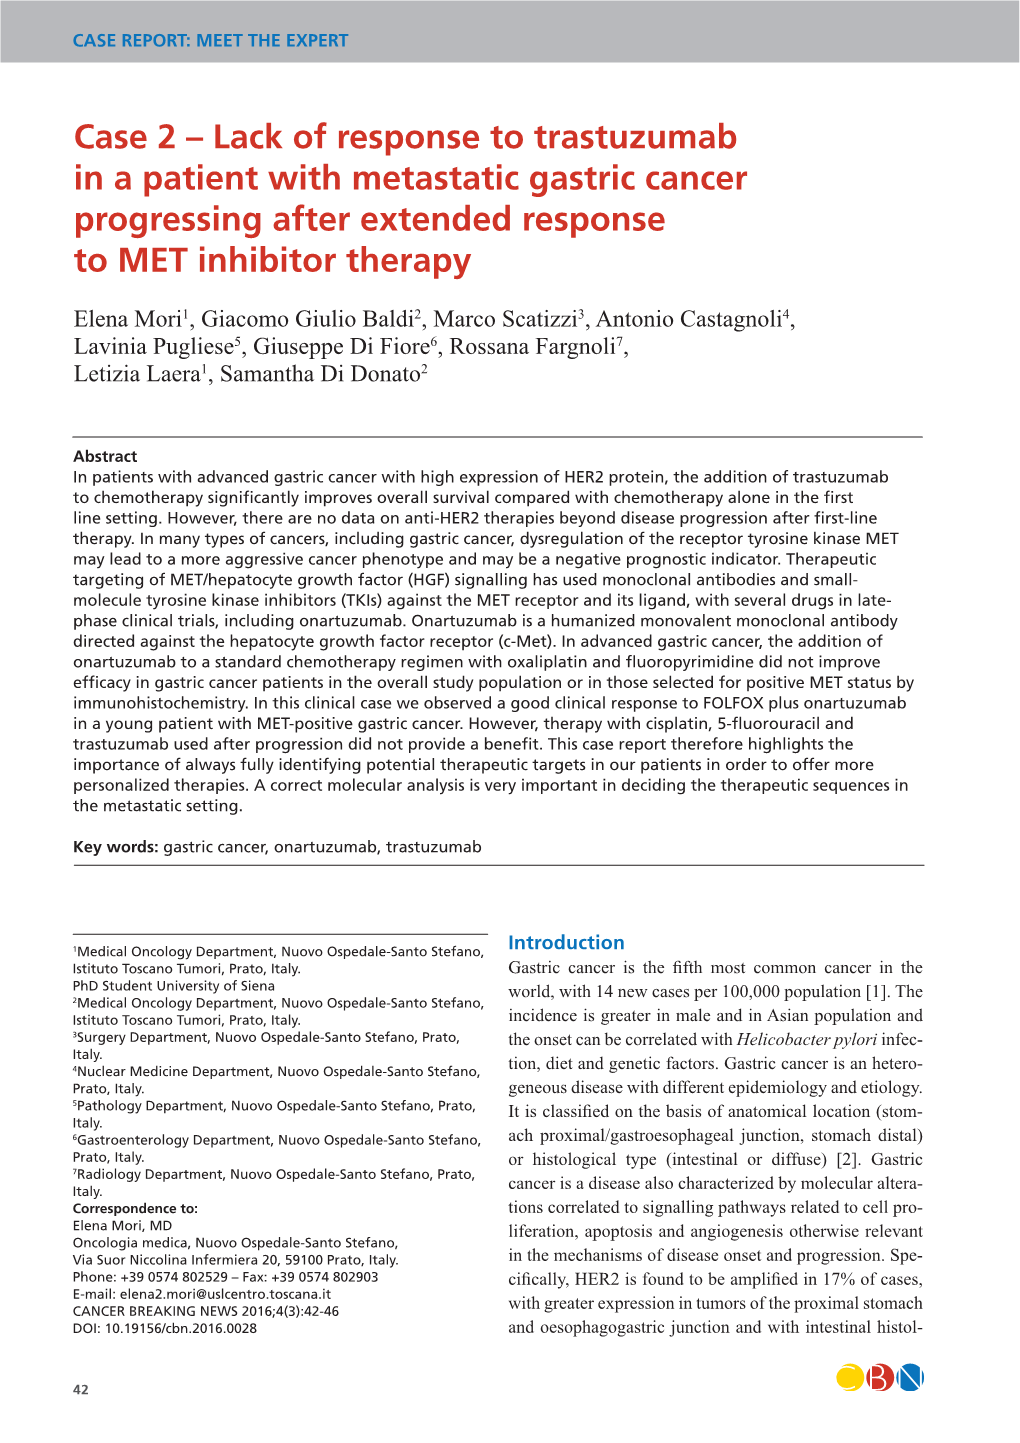 Case 2 – Lack of Response to Trastuzumab in a Patient with Metastatic Gastric Cancer Progressing After Extended Response to MET Inhibitor Therapy